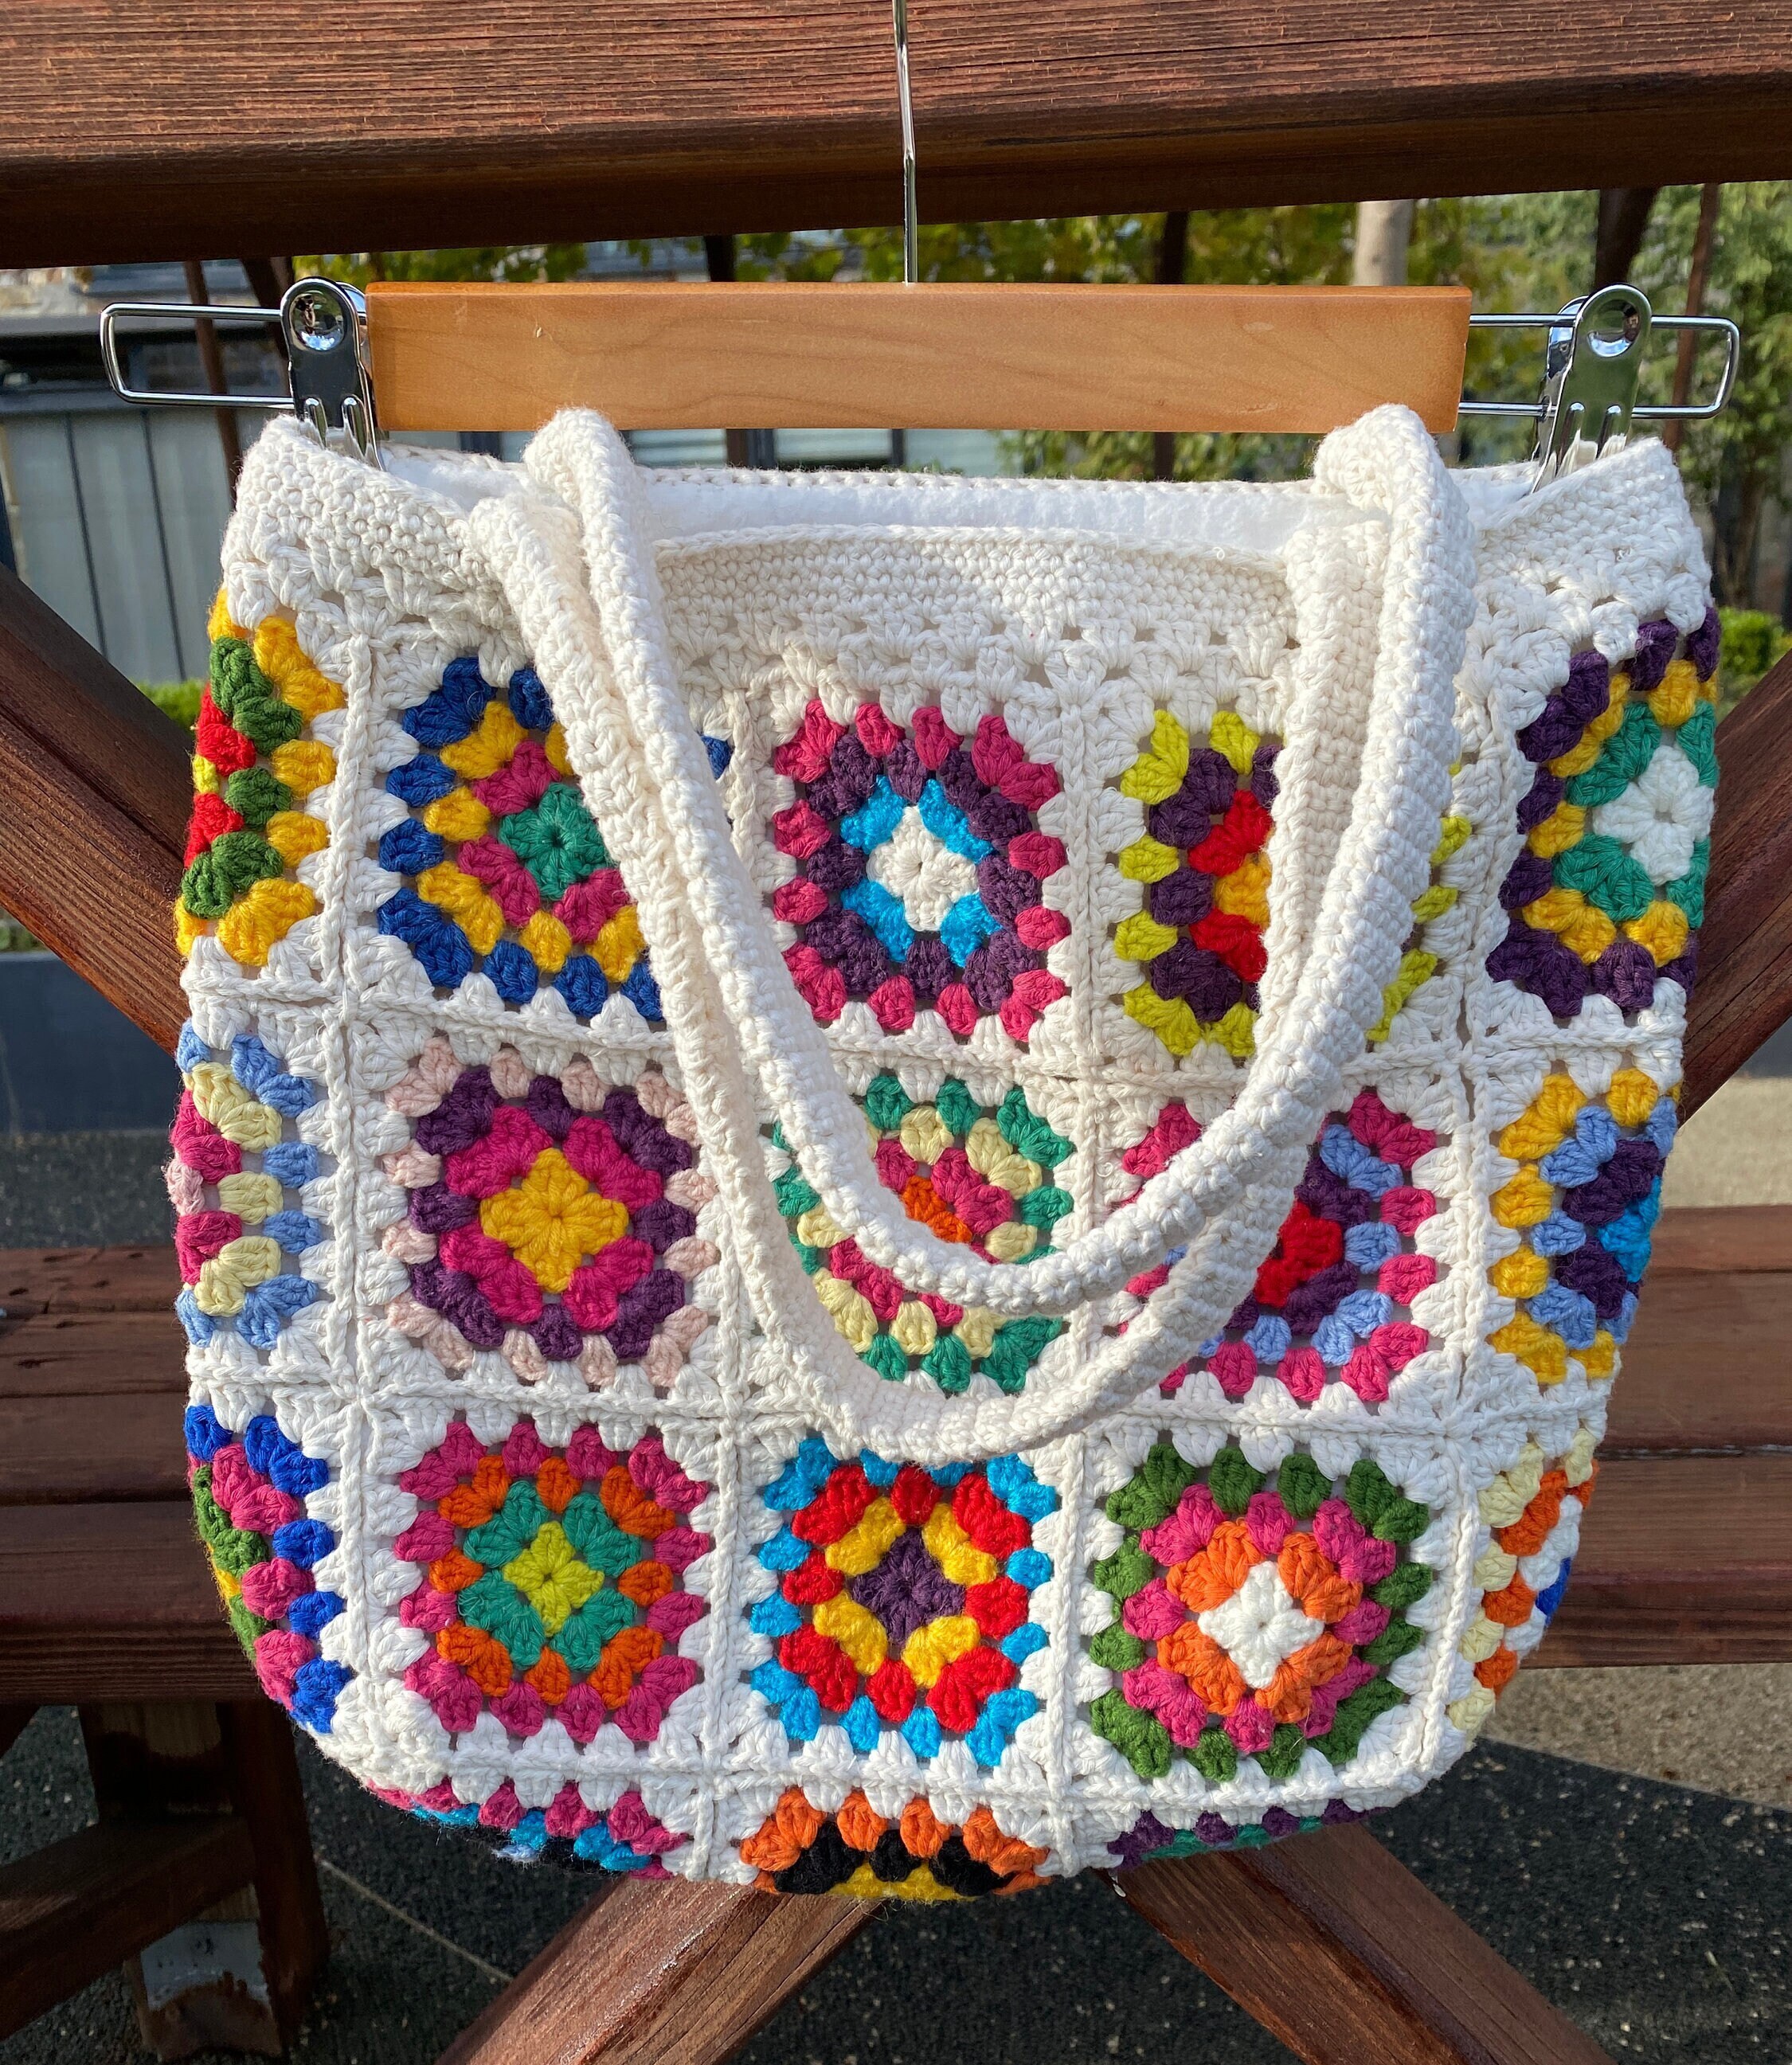 Purses, Bags and Totes - Oh My! • Oombawka Design Crochet